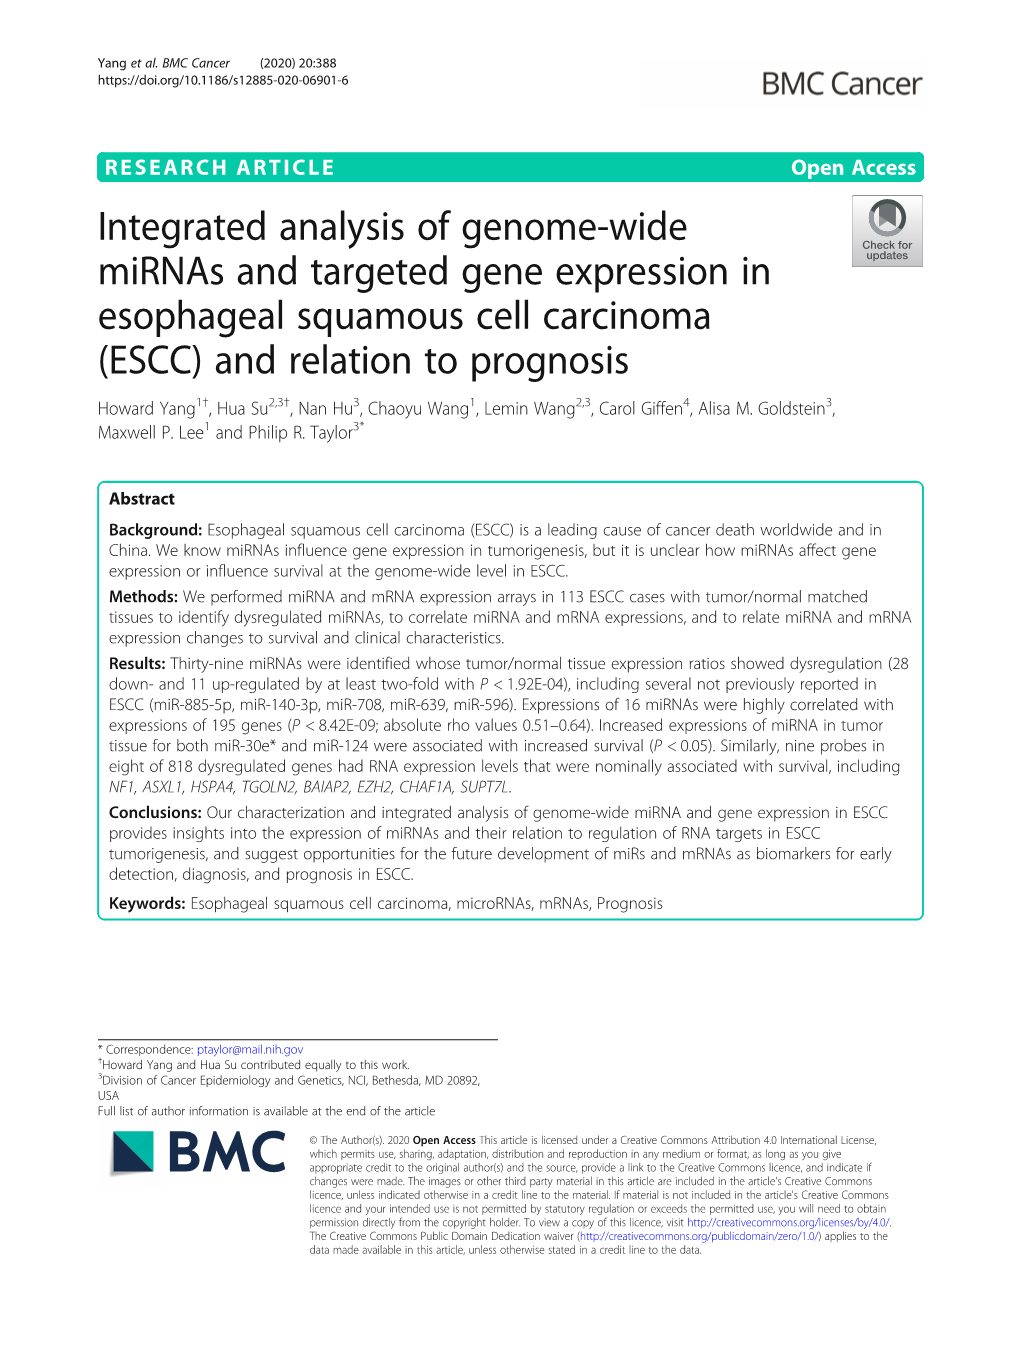 Integrated Analysis of Genome-Wide Mirnas and Targeted Gene Expression in Esophageal Squamous Cell Carcinoma (ESCC) and Relation